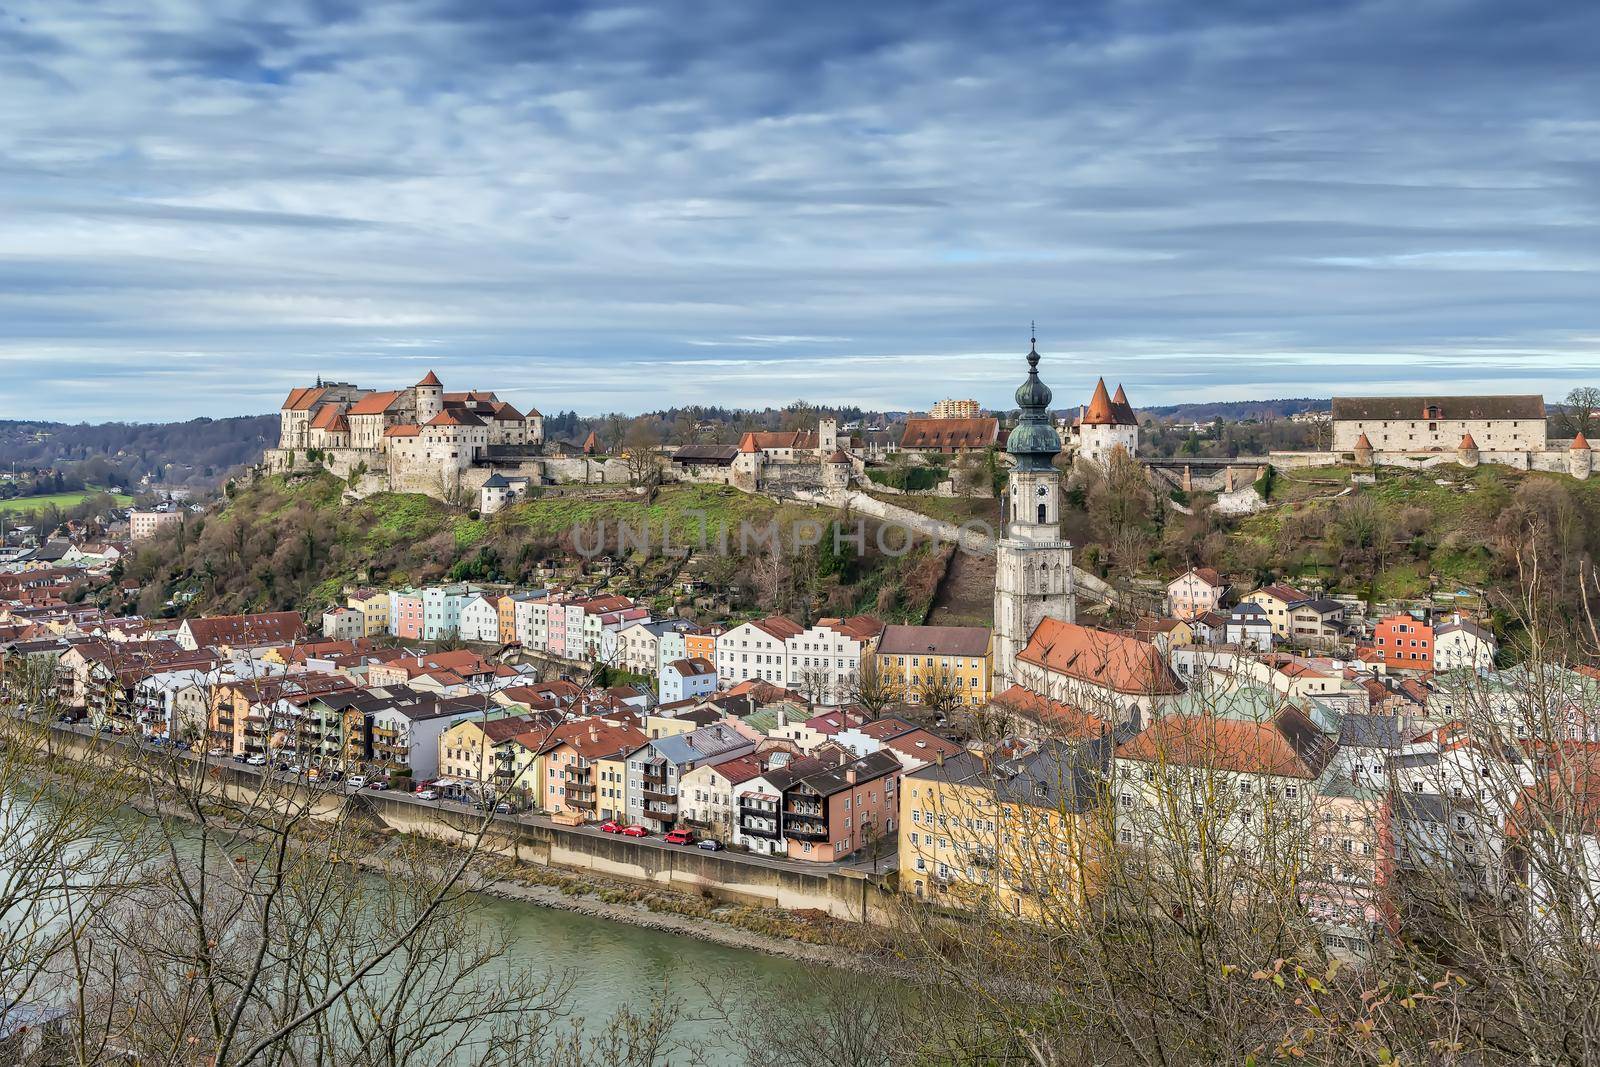 View of Burghausen, Germany by borisb17